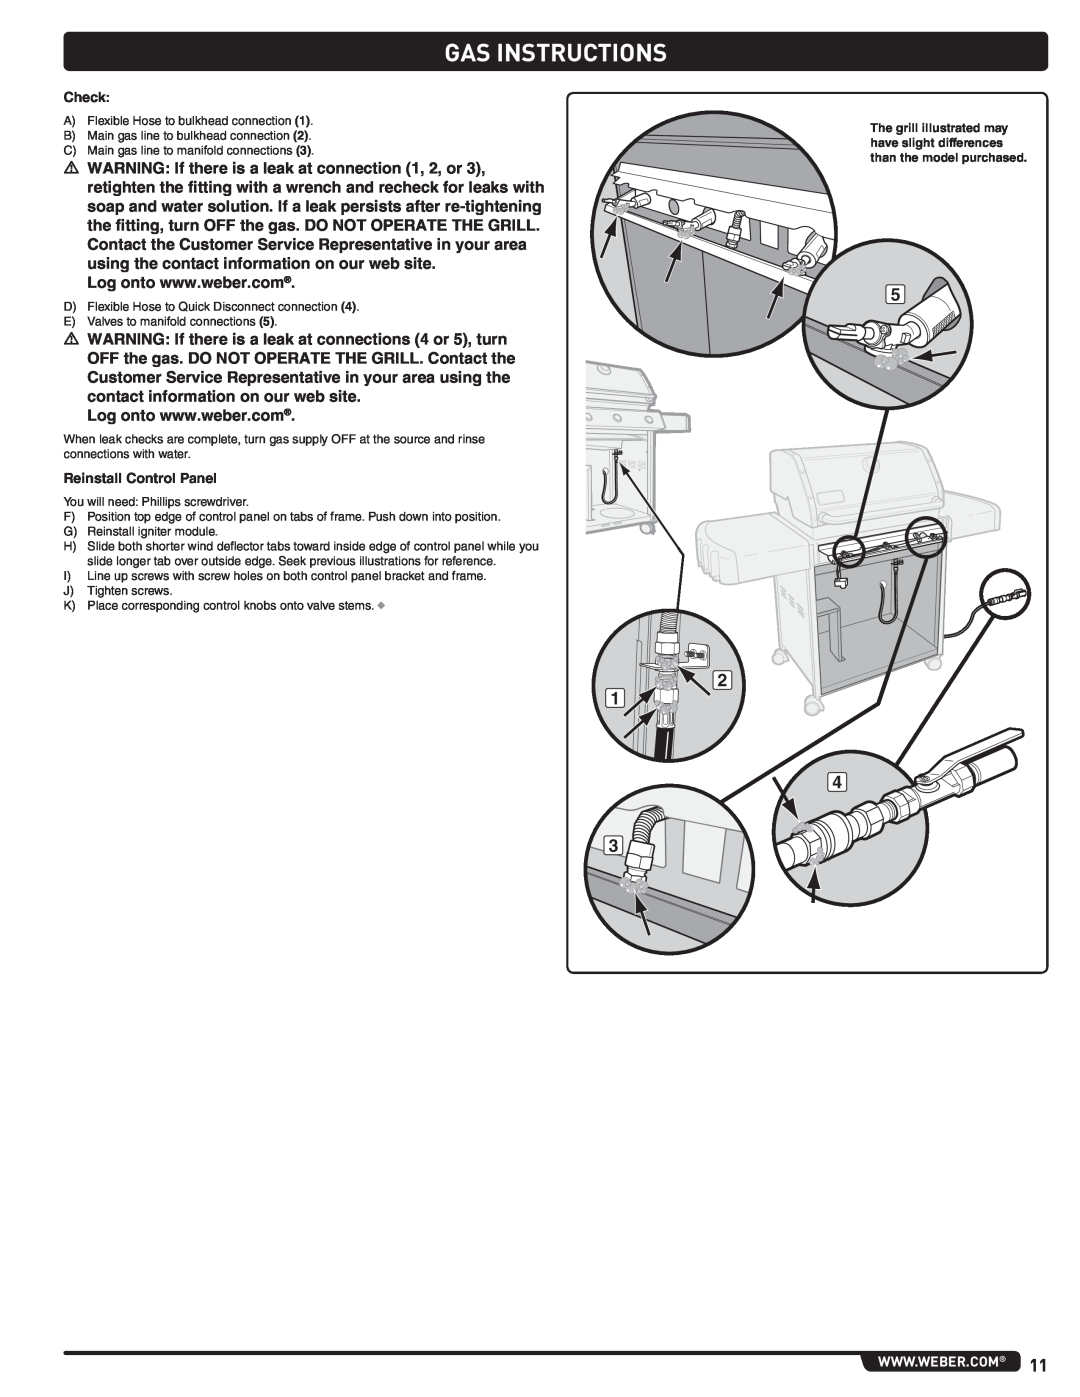 Weber 56515 manual Gas Instructions, m WARNING If there is a leak at connection 1, 2, or 